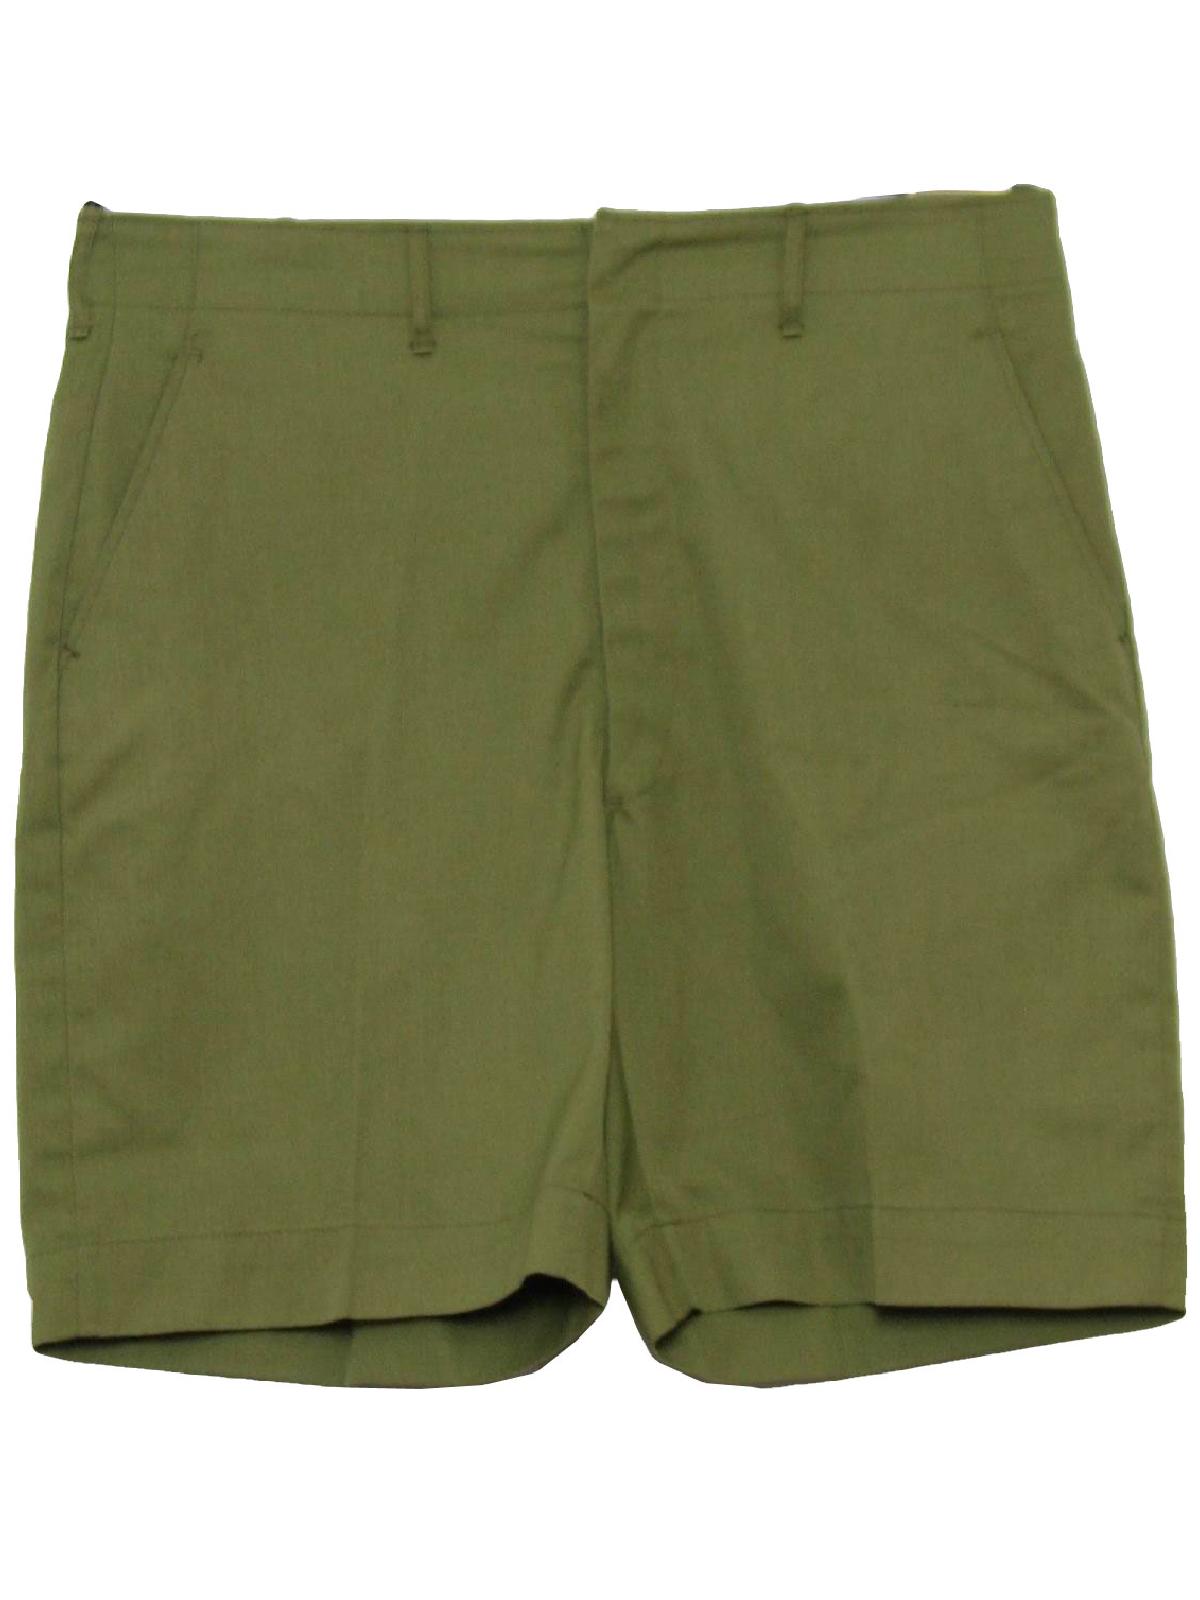 Boy Scouts of America Sixties Vintage Shorts: 60s -Boy Scouts of ...